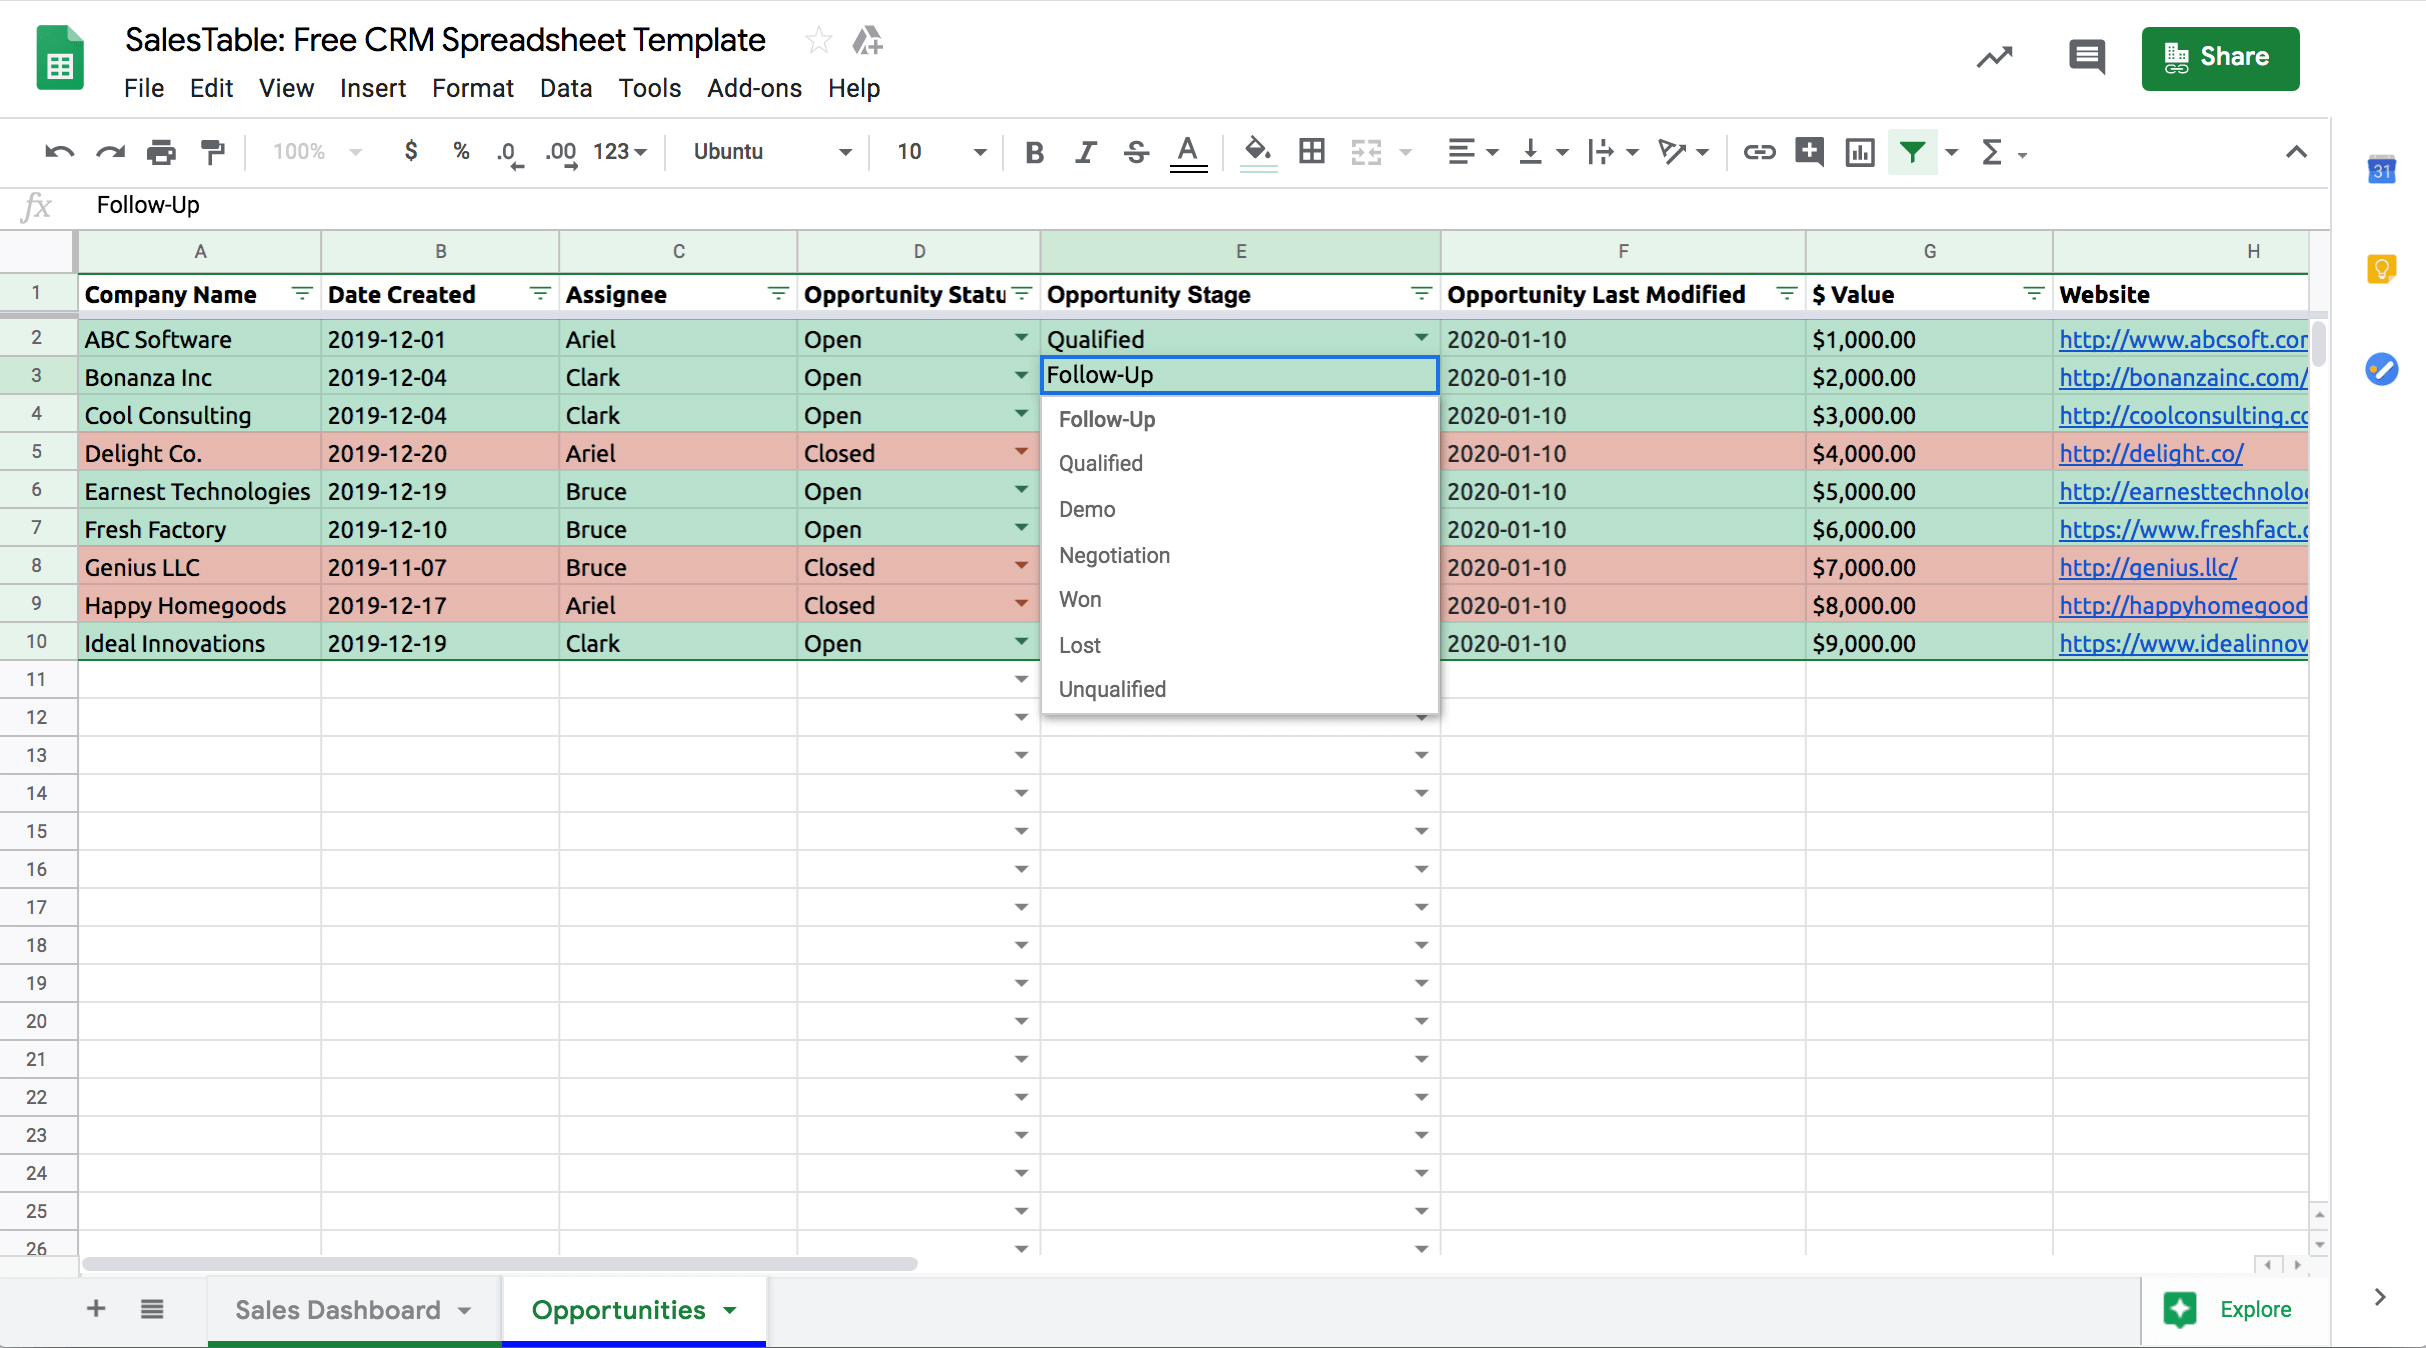 Adjust Opportunity Stages in Your Google Sheets CRM Template